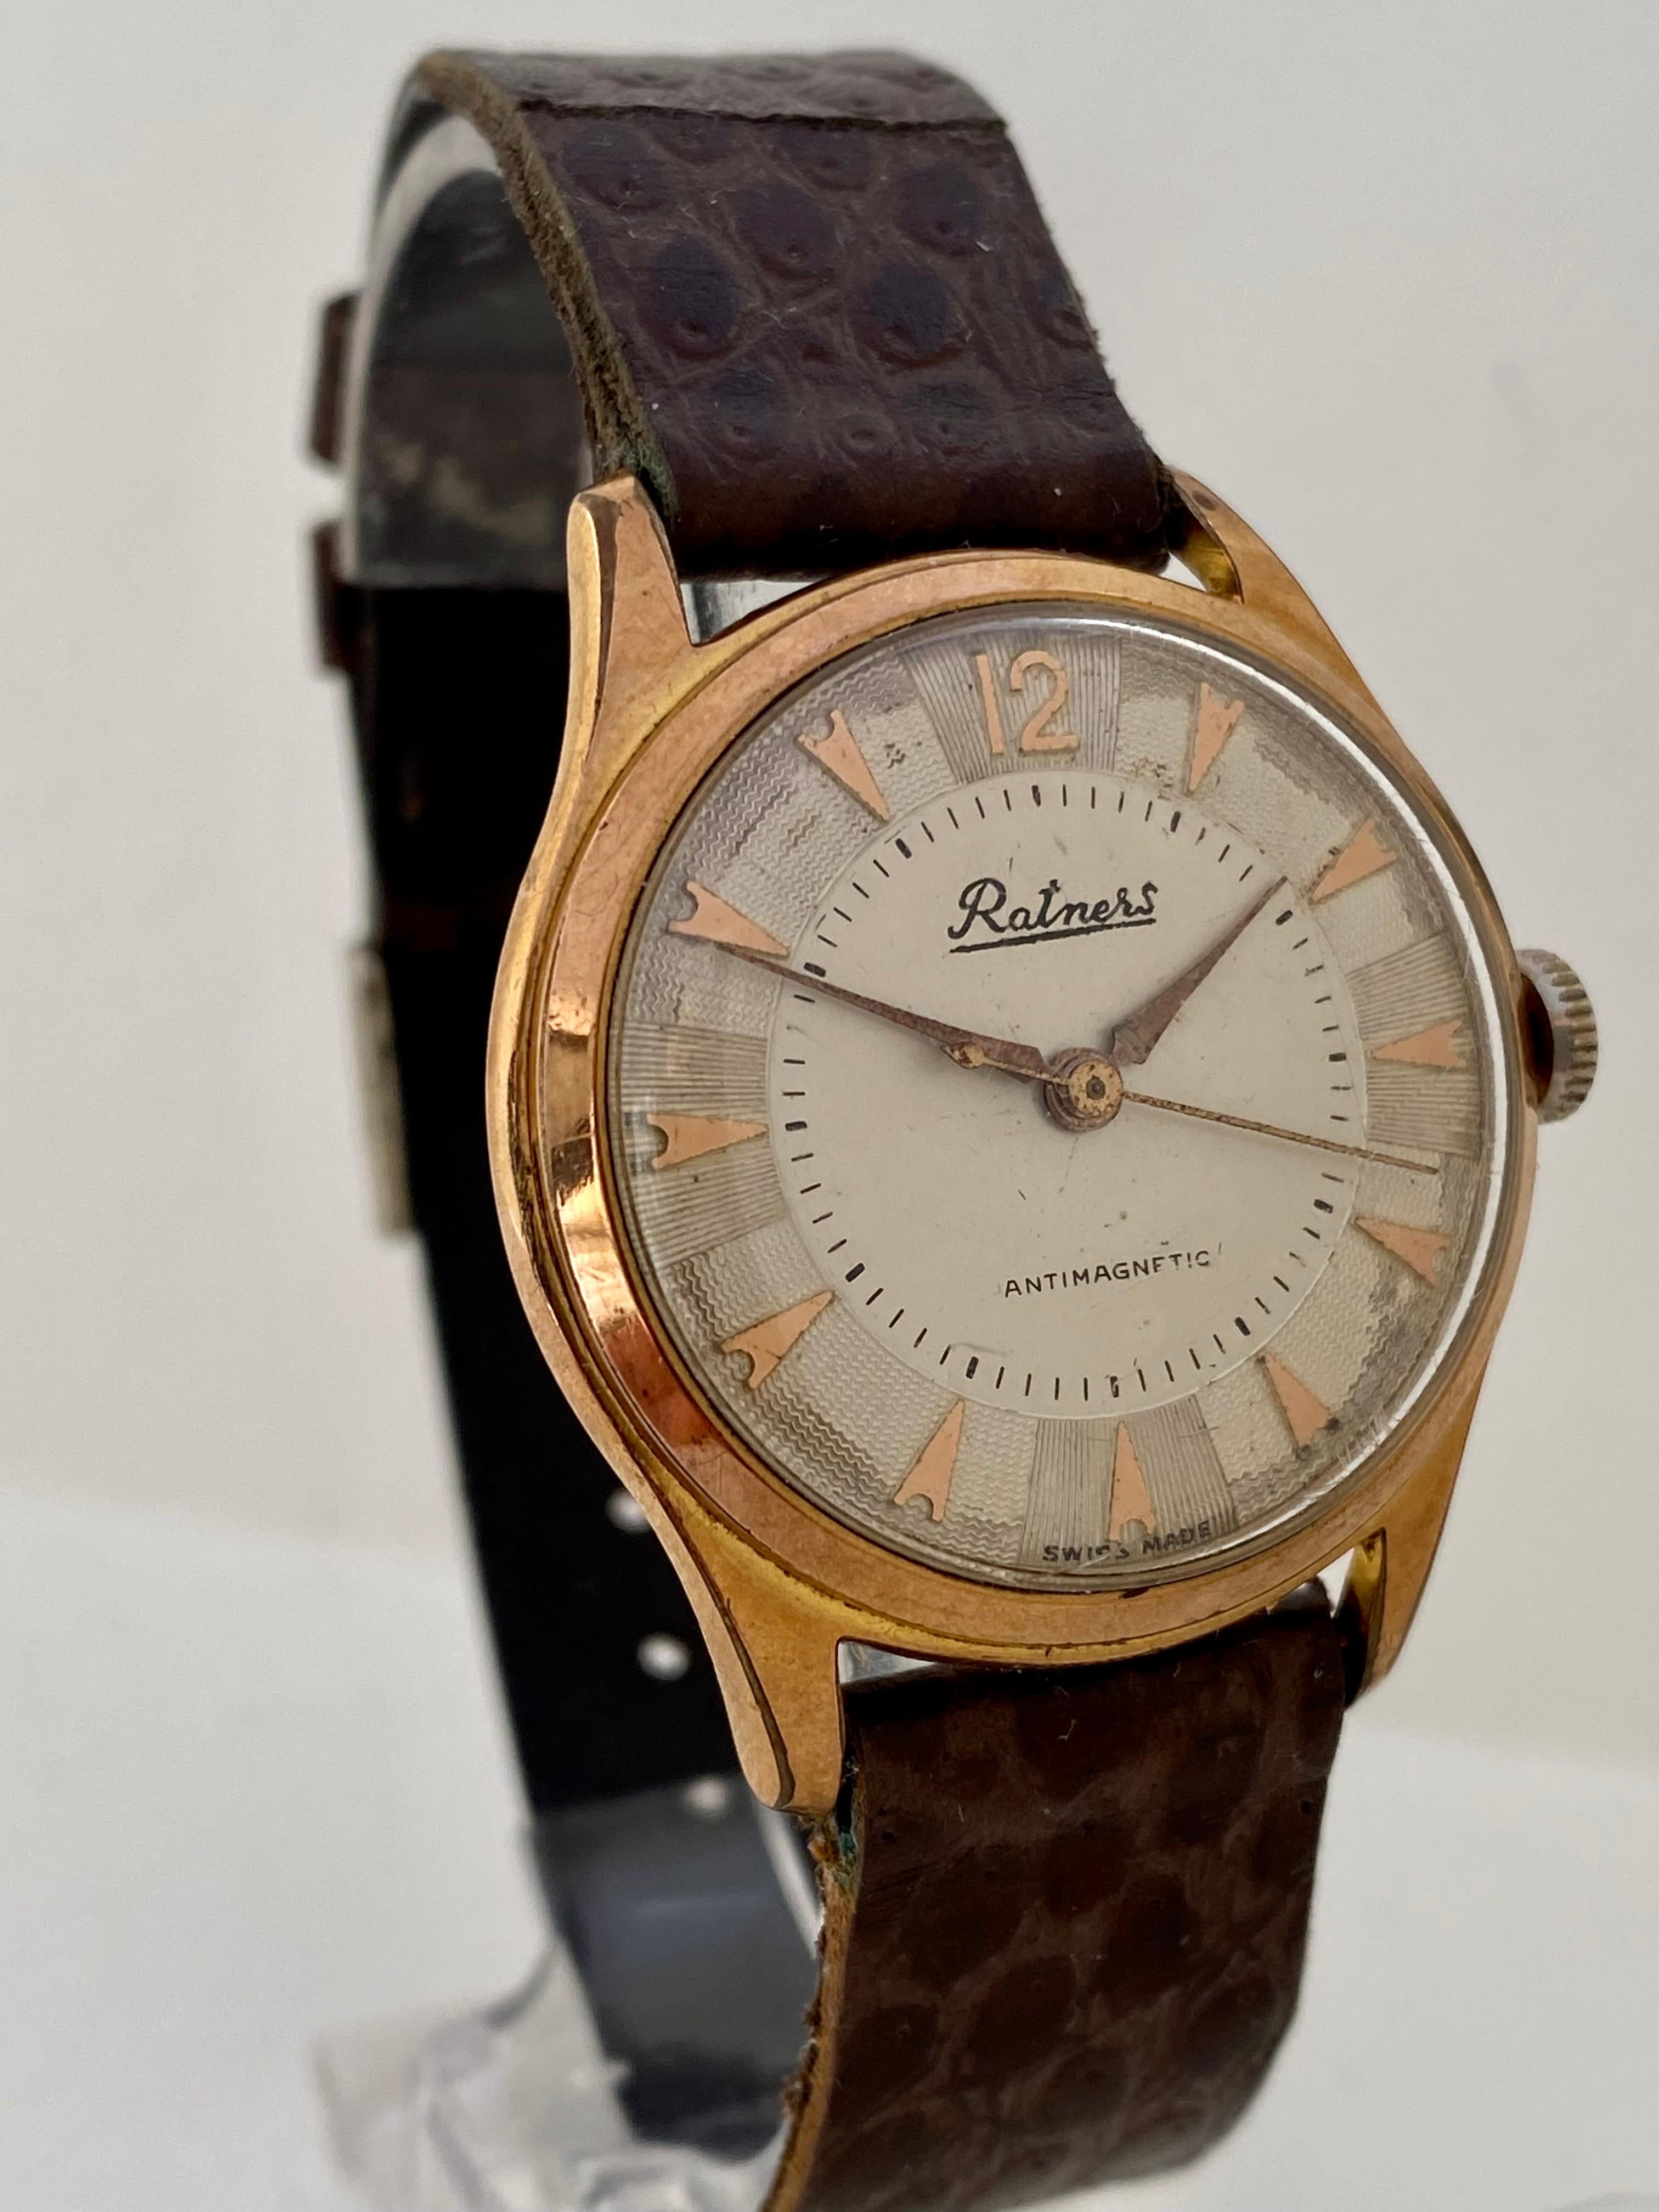 This beautiful pre-owned 32mm diameter manual winding gold plated and stainless steel back swiss watch is in good working condition and it is running well. Visible signs of ageing and wear with small light marks on the glass surface and on the watch